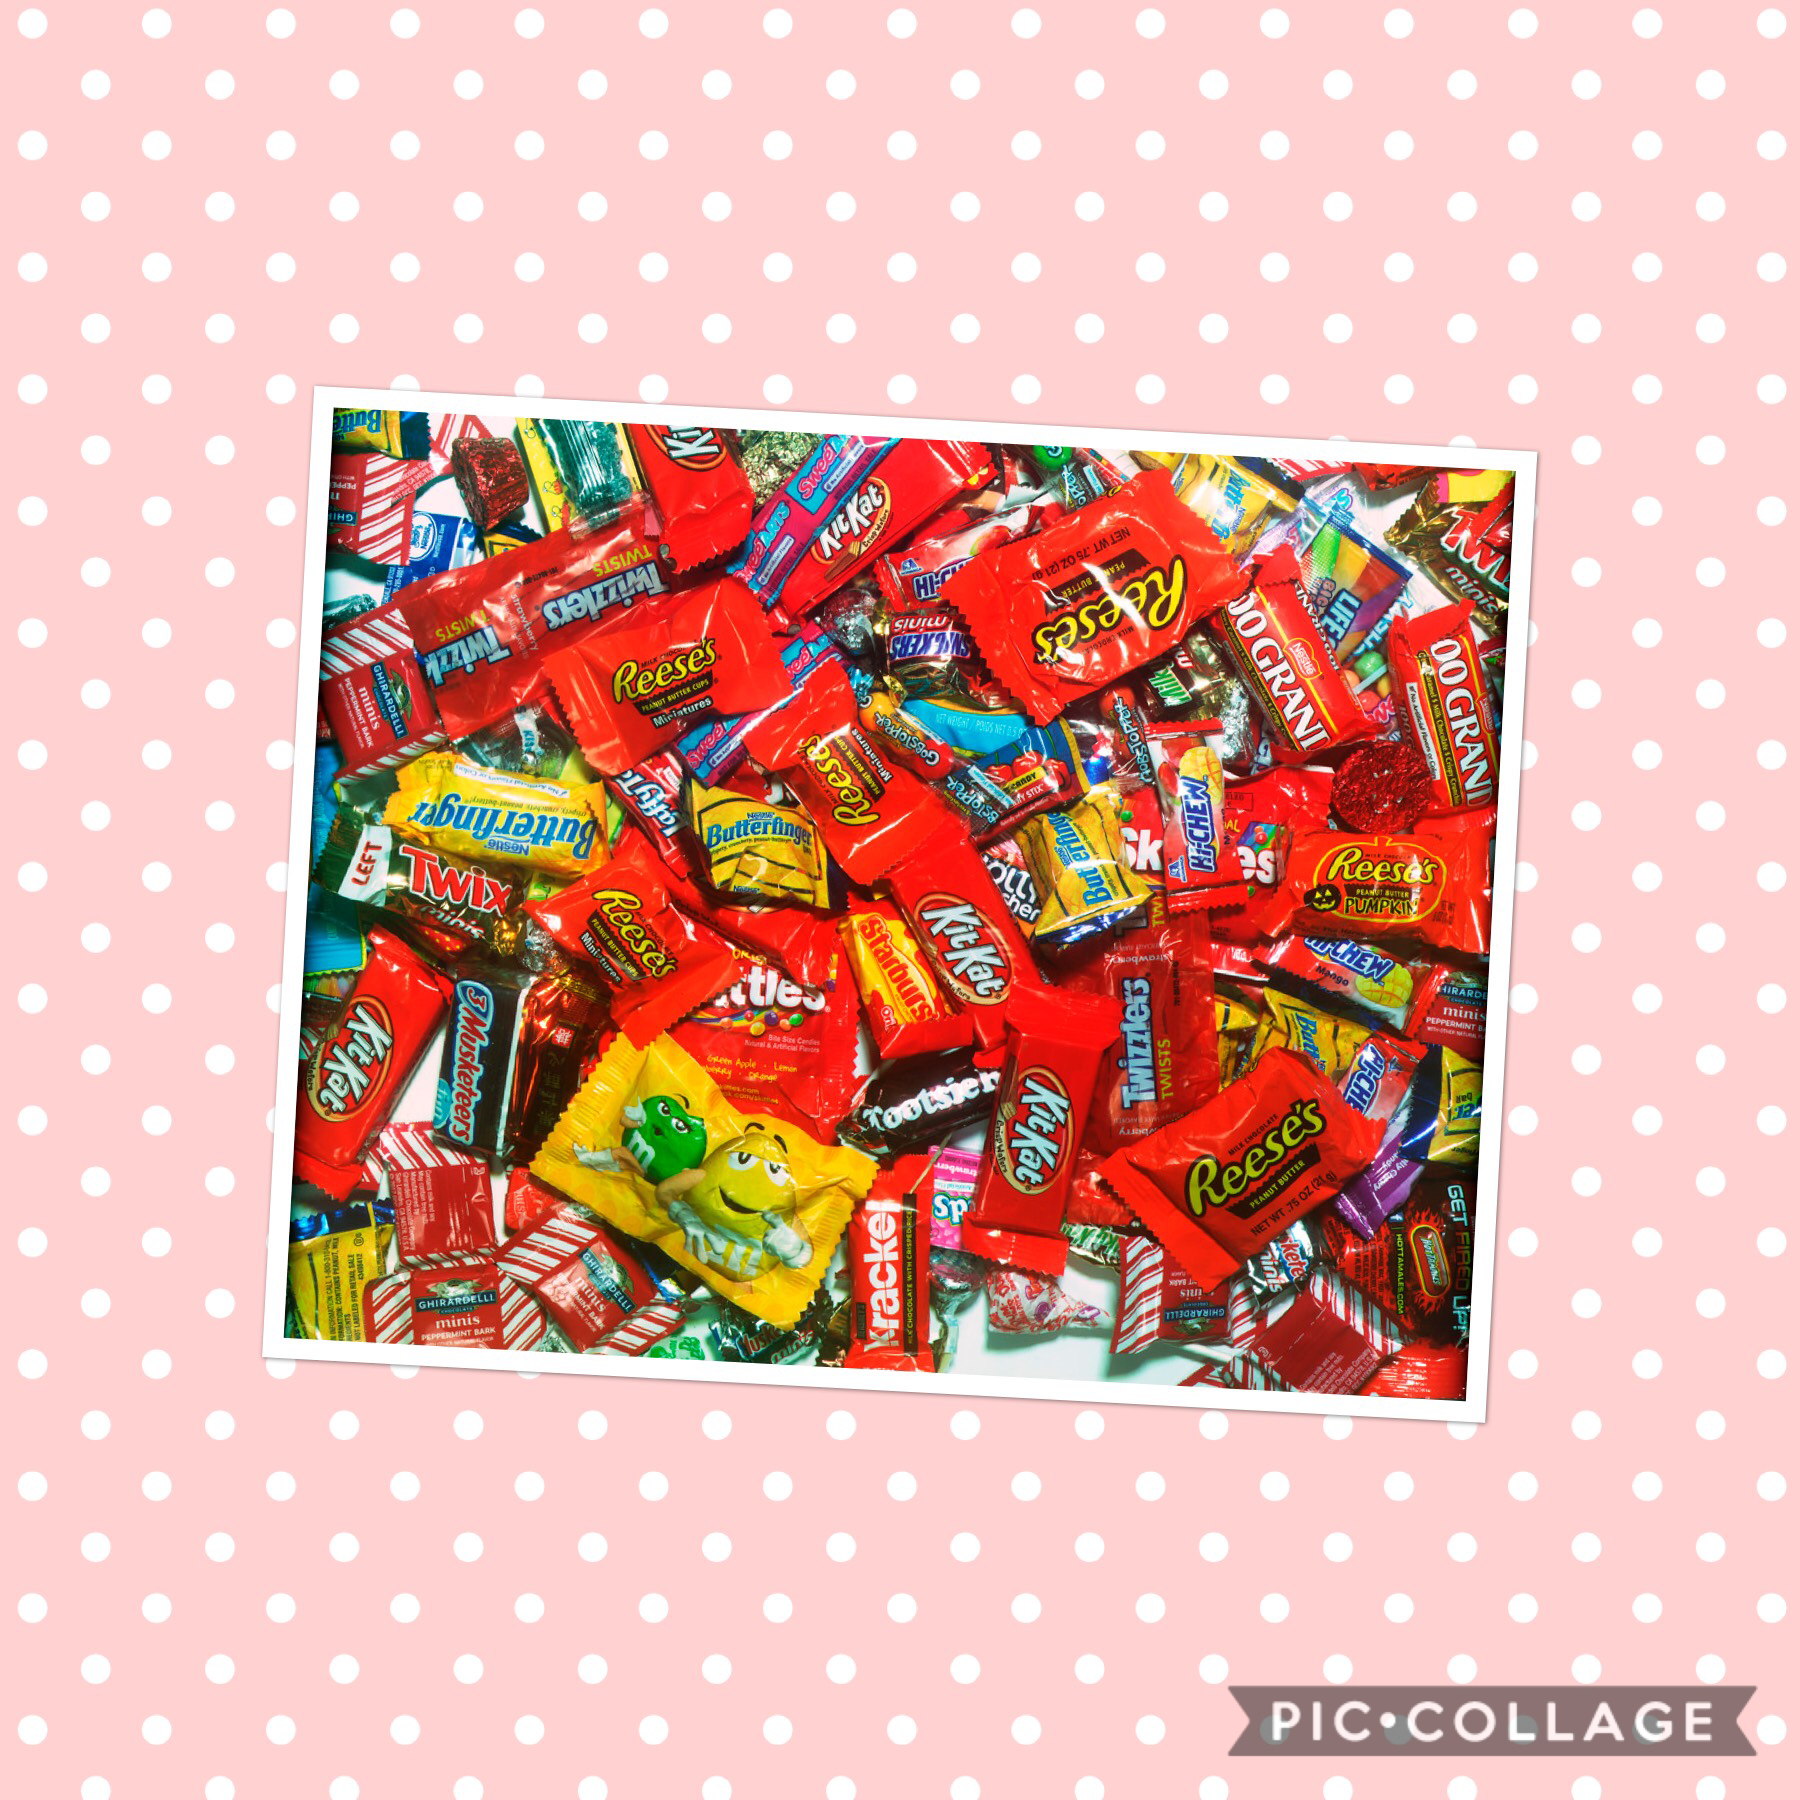 Guess my fav candy and get a free shoutout!